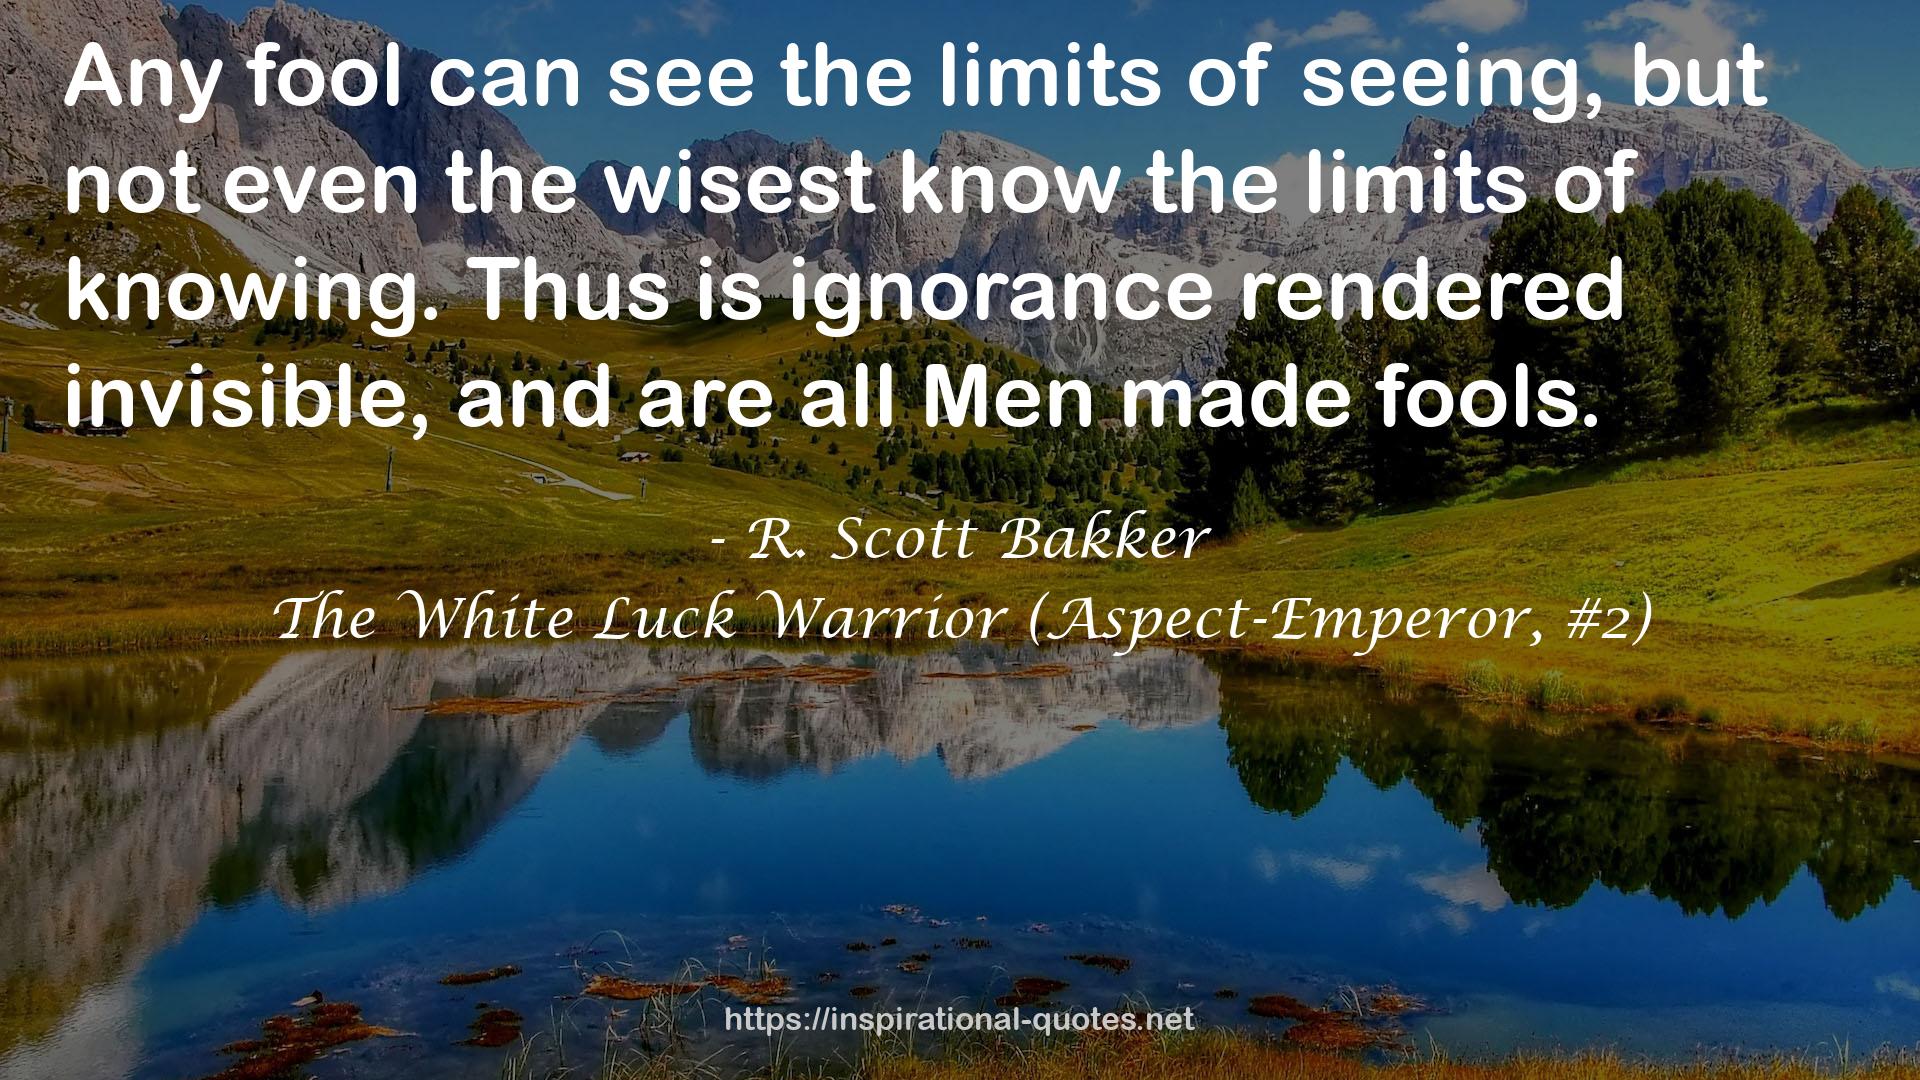 The White Luck Warrior (Aspect-Emperor, #2) QUOTES